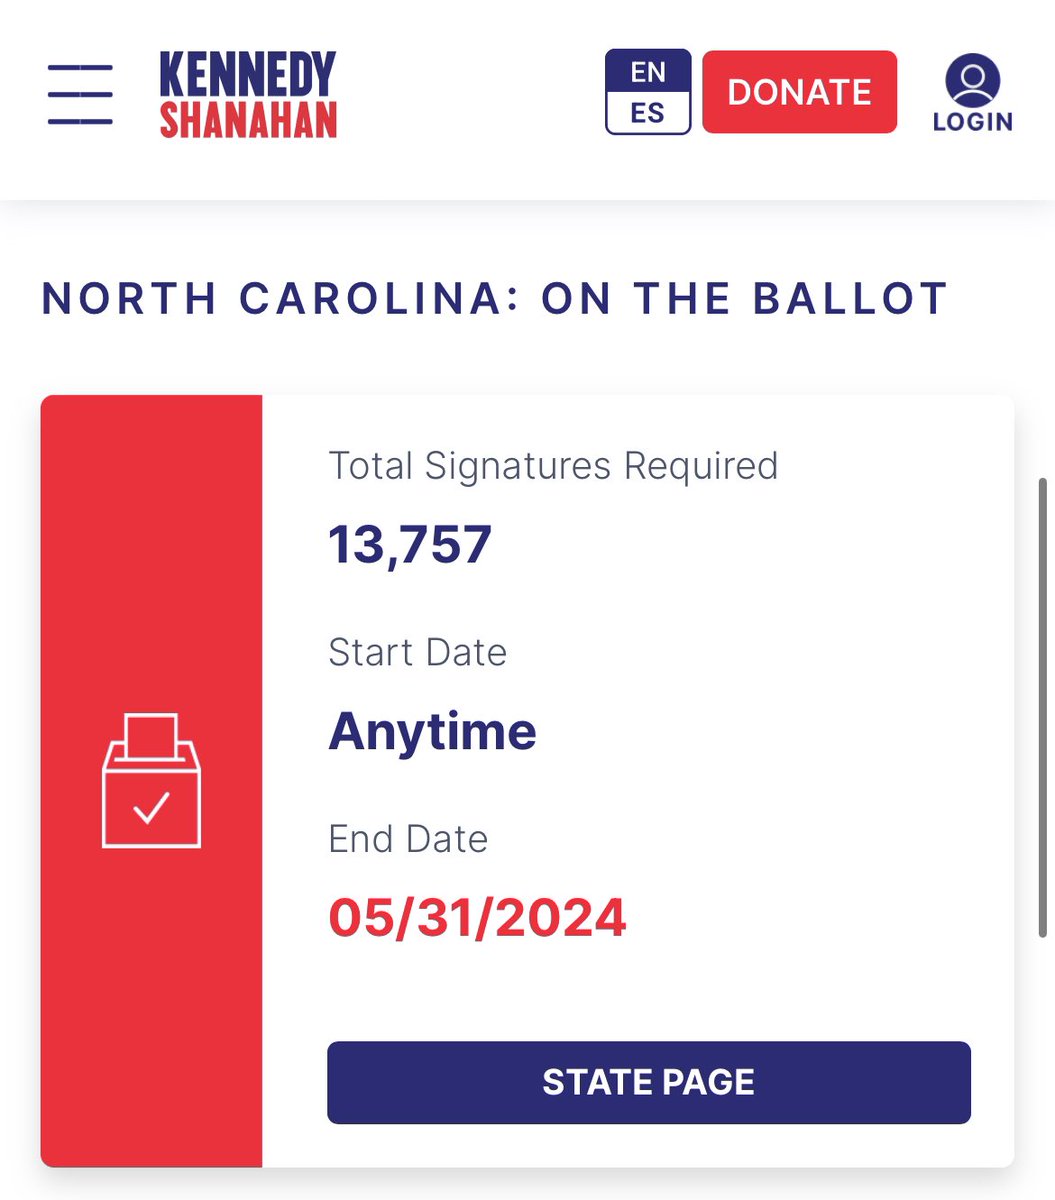 RFK Jr's website claims to be 'on the ballot' in North Carolina. That's not officially the case yet. Campaign is trying to create a party (We The People) to nominate him. Comms for state board of election tells me the 'board has not received any signatures from We The People.'